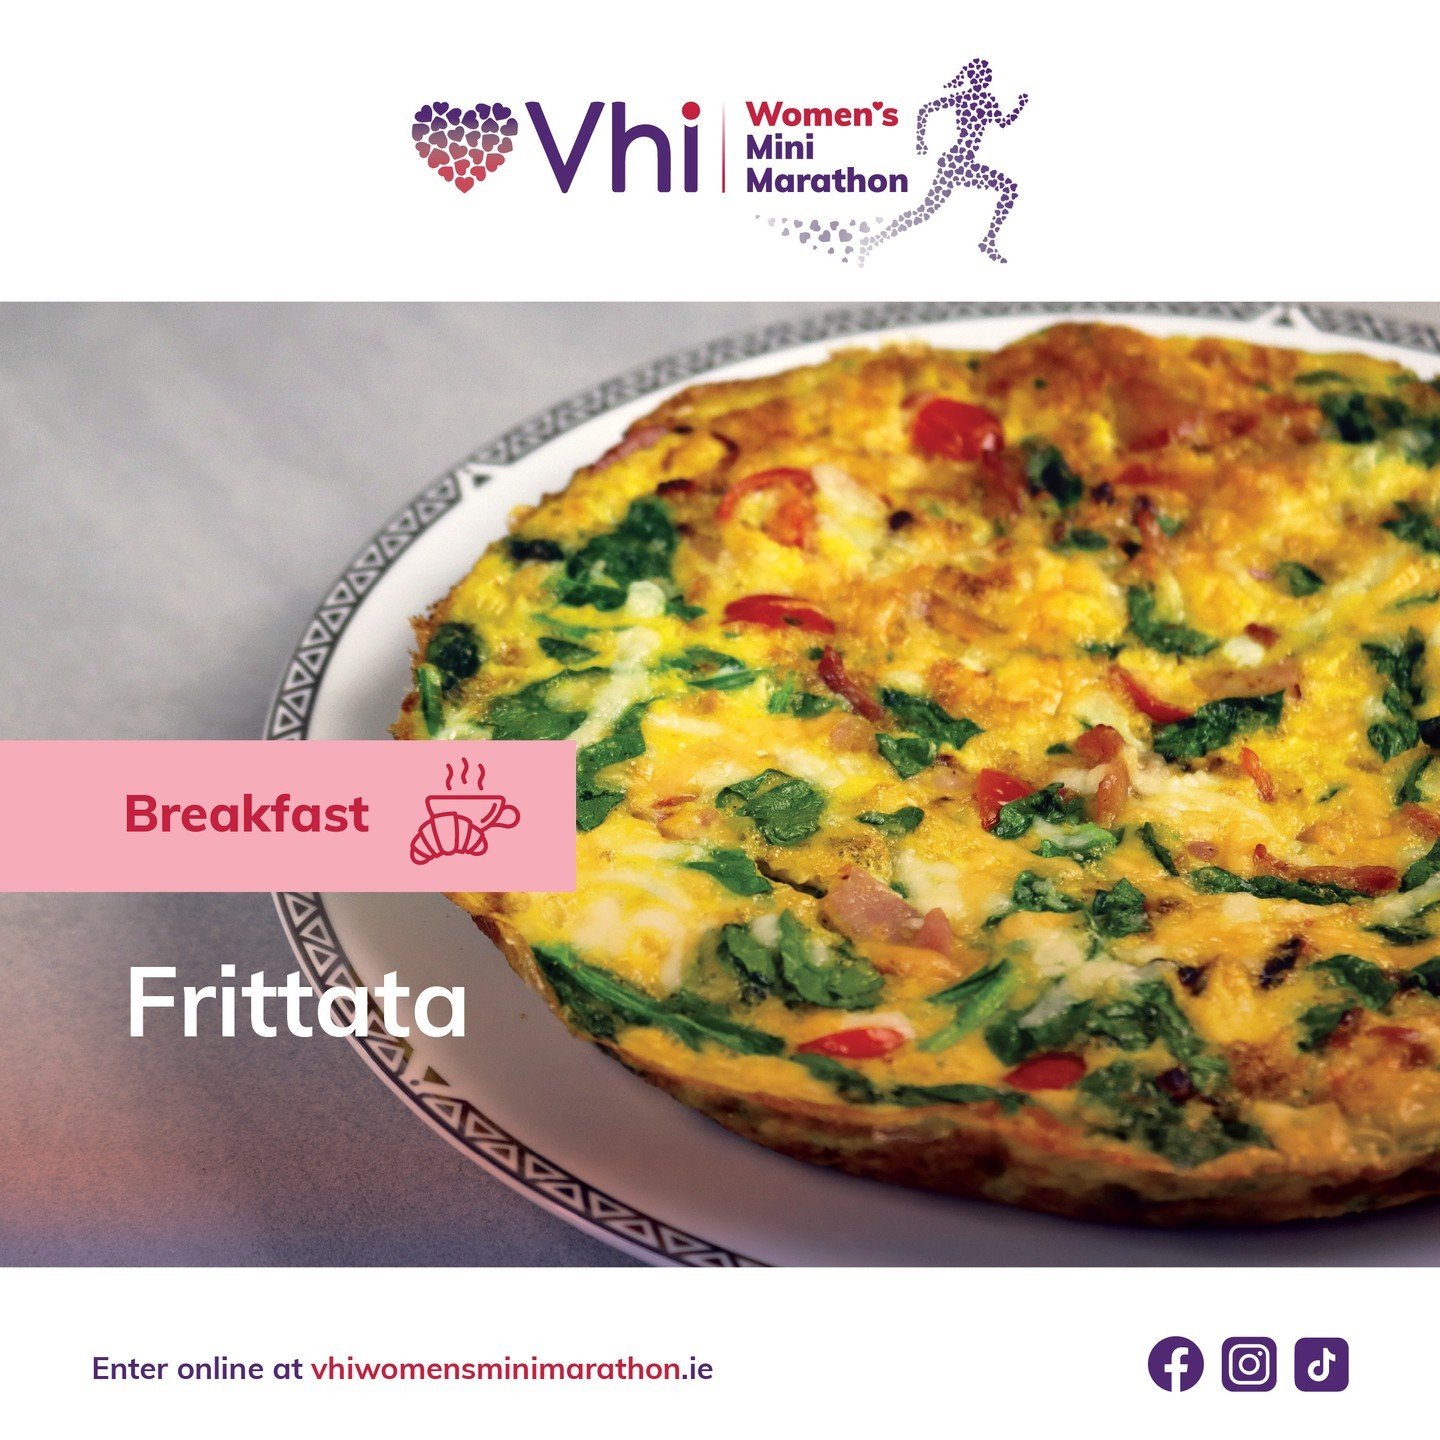 Hands up if you&rsquo;re an egg lover 🙋&zwj;♀️ @vhi_ie ambassador, @nathalielennon_ has a delicious frittata recipe for a breakfast packed with protein and vitamins! 
What will you serve your frittata with? 🍳 Let us know below!
Link in bio for full